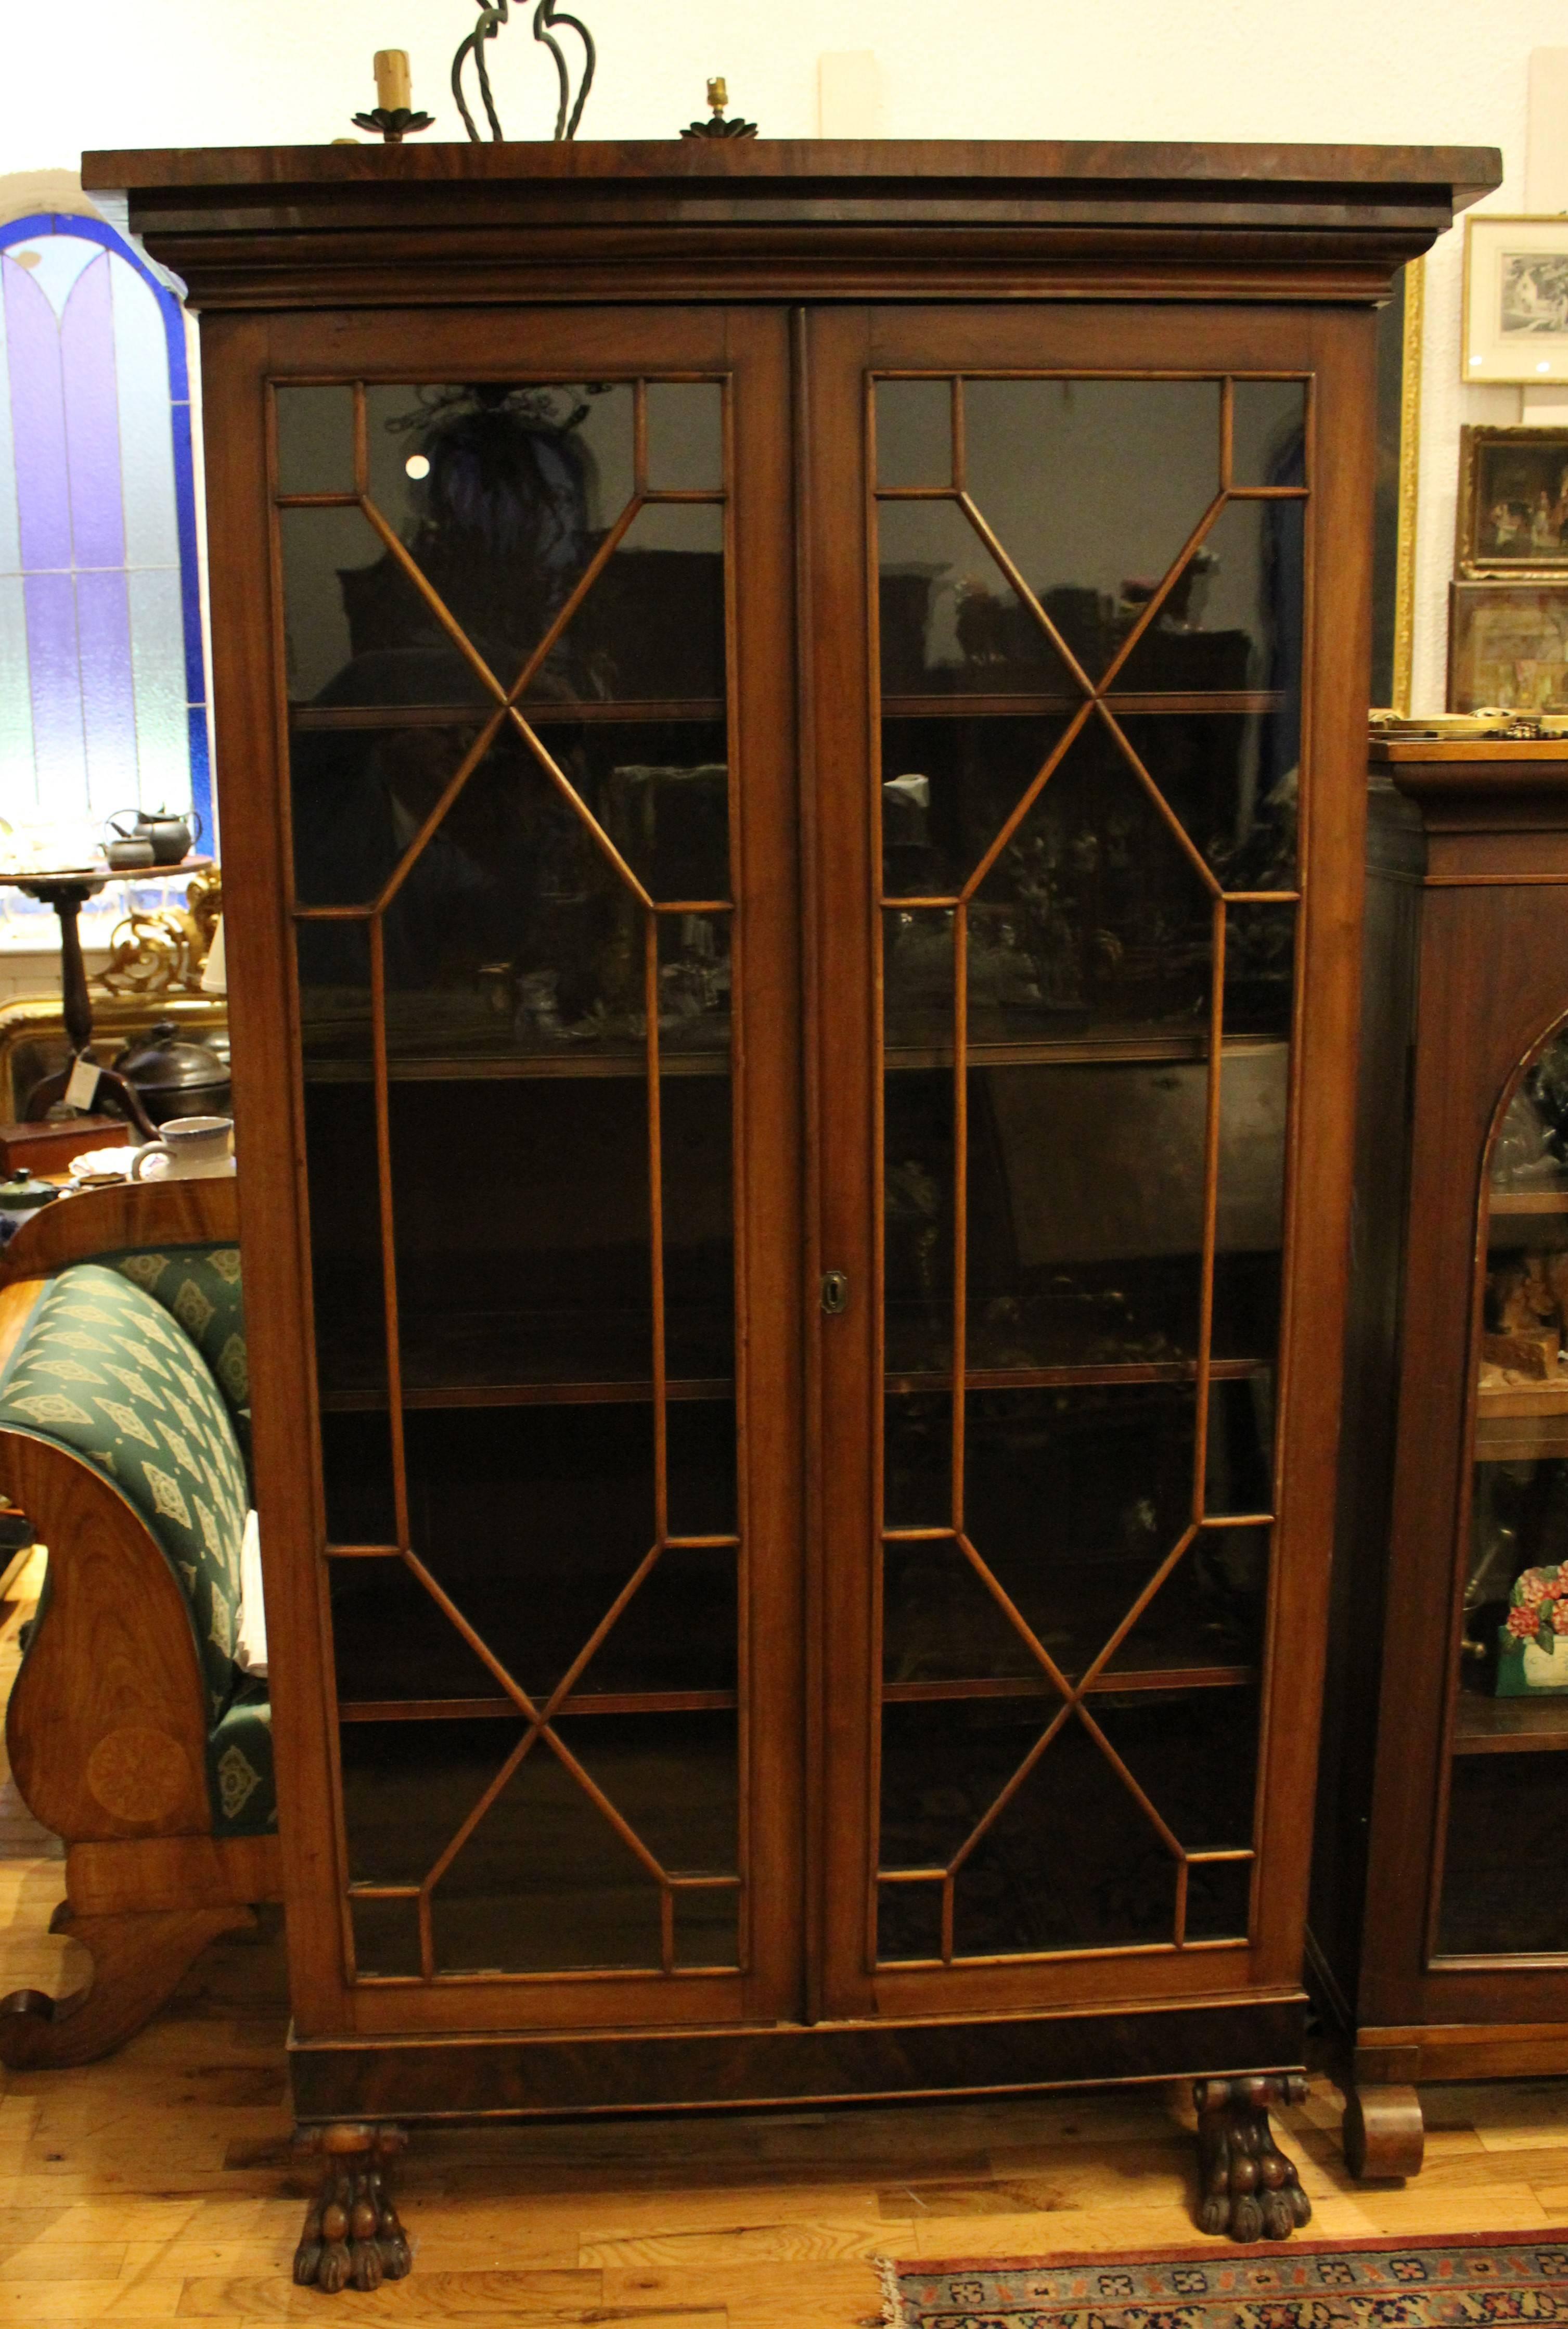 Regency mahogany display cabinet with original finish, adjustable shelves and claw feet.